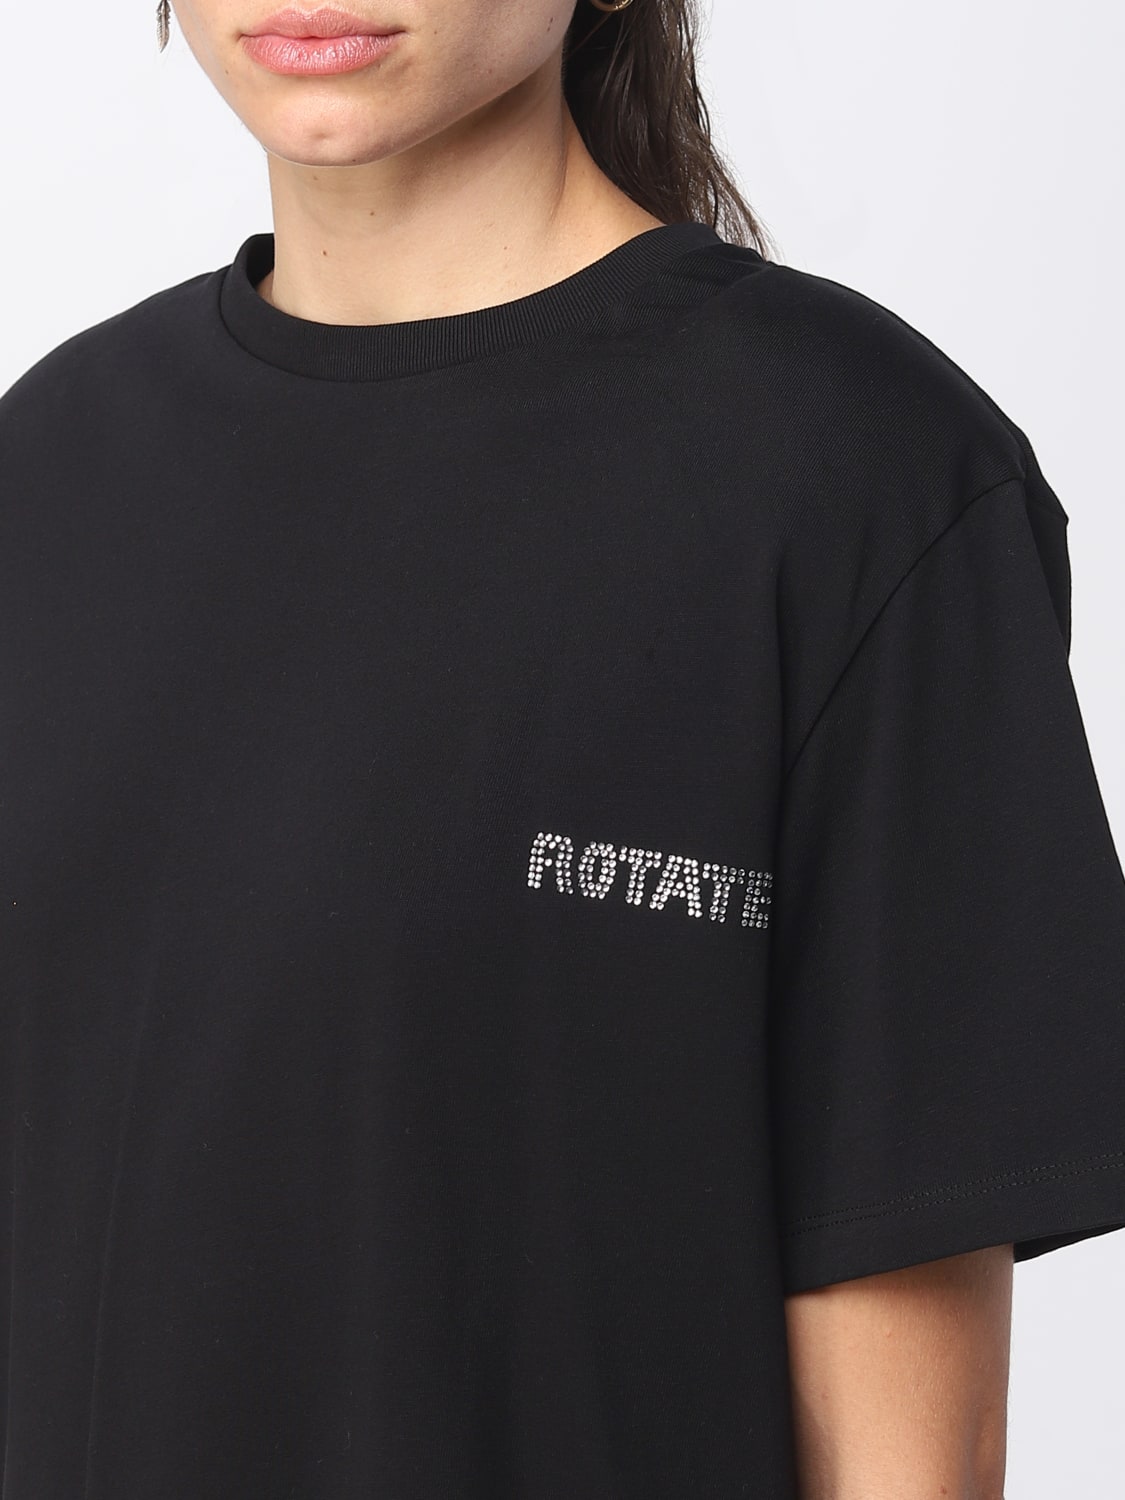 Rotate online at | t-shirt 111212100 t-shirt Black for woman - ROTATE: